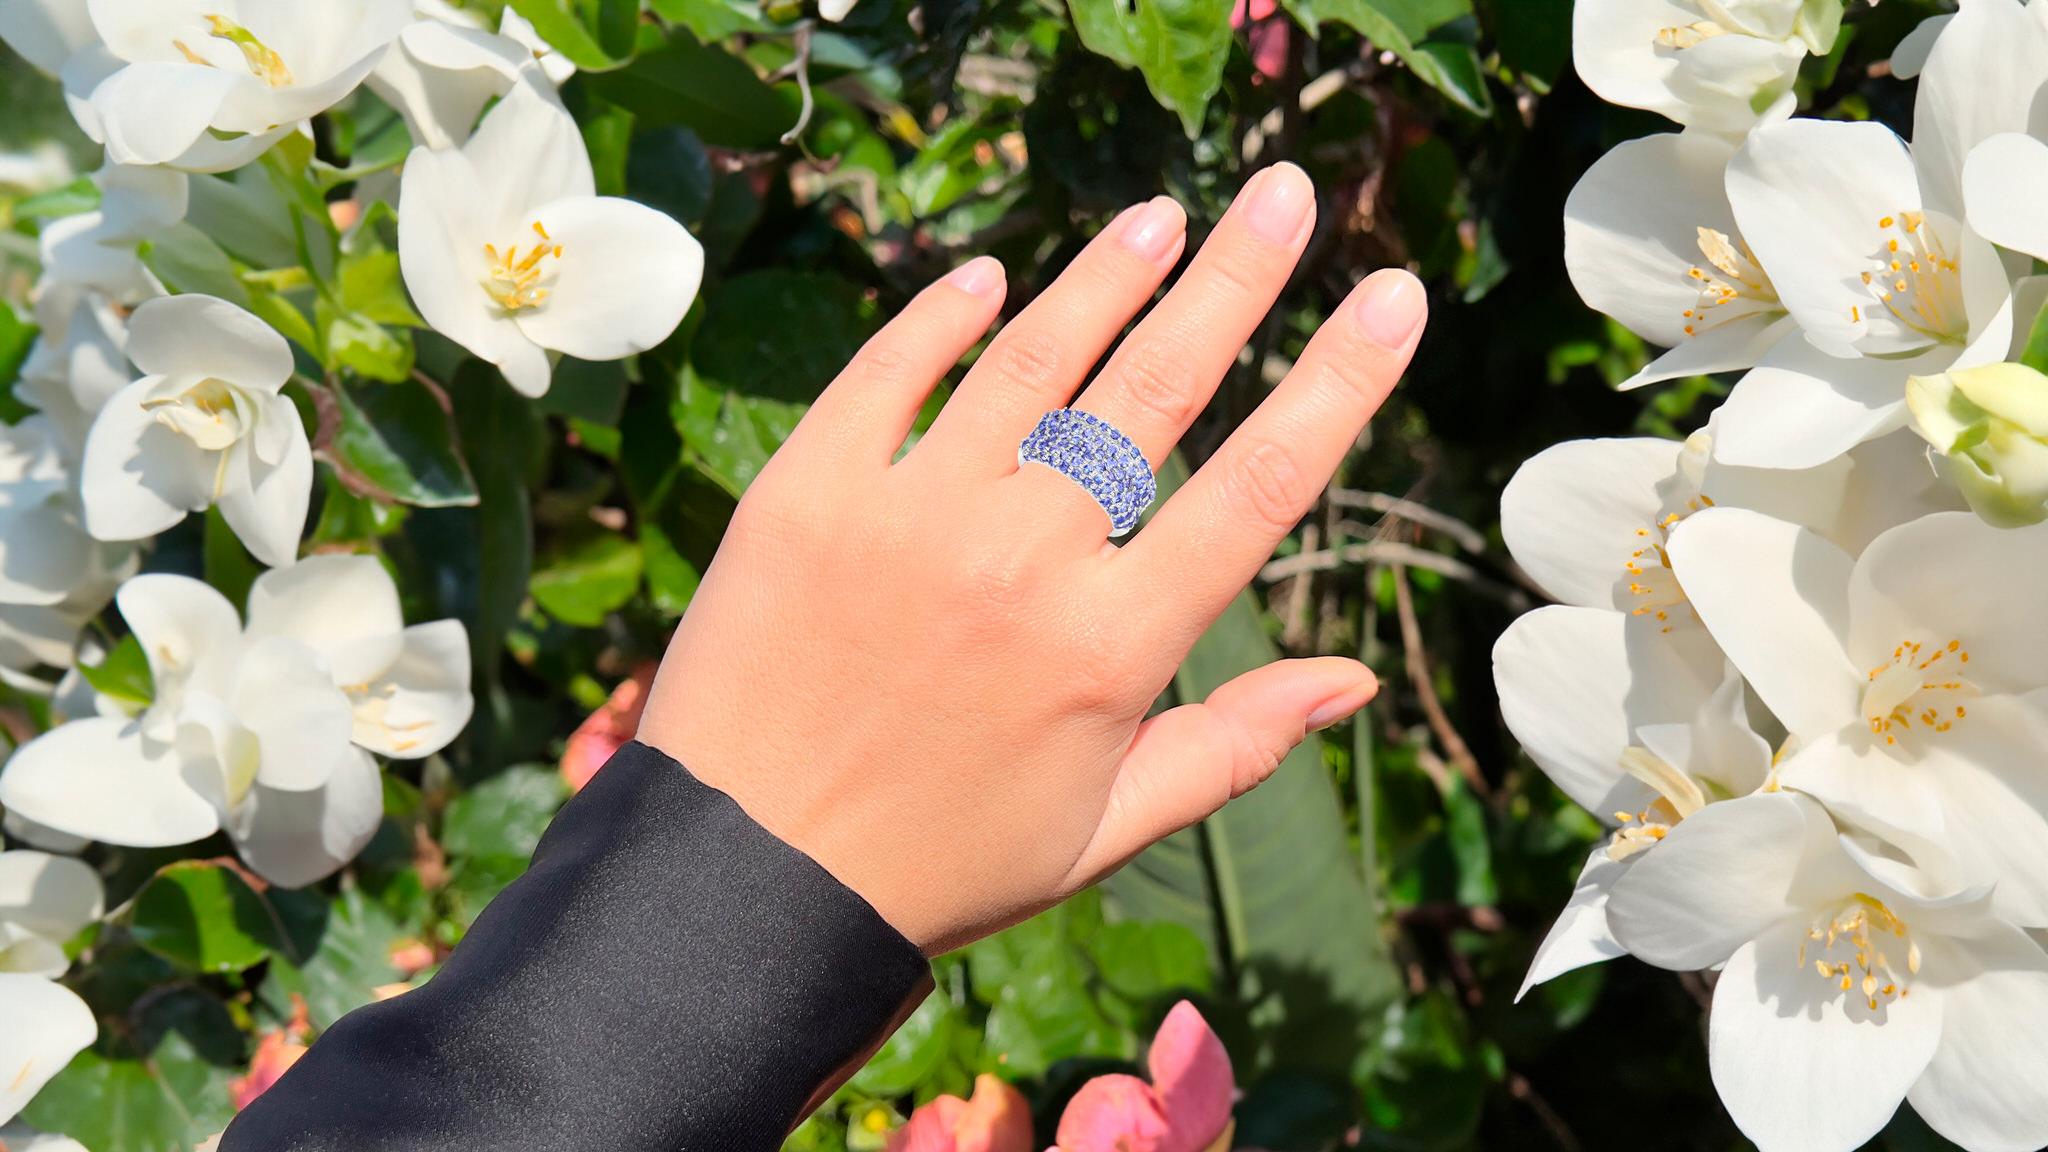 It comes with the Gemological Appraisal by GIA GG/AJP
All Gemstones are Natural
Tanzanites = 2.50 Carats
Cut: Round
Stone Quantity: 79
Metal: Rhodium Plated Sterling Silver
Ring Size: 7* US
*It can be resized complimentary